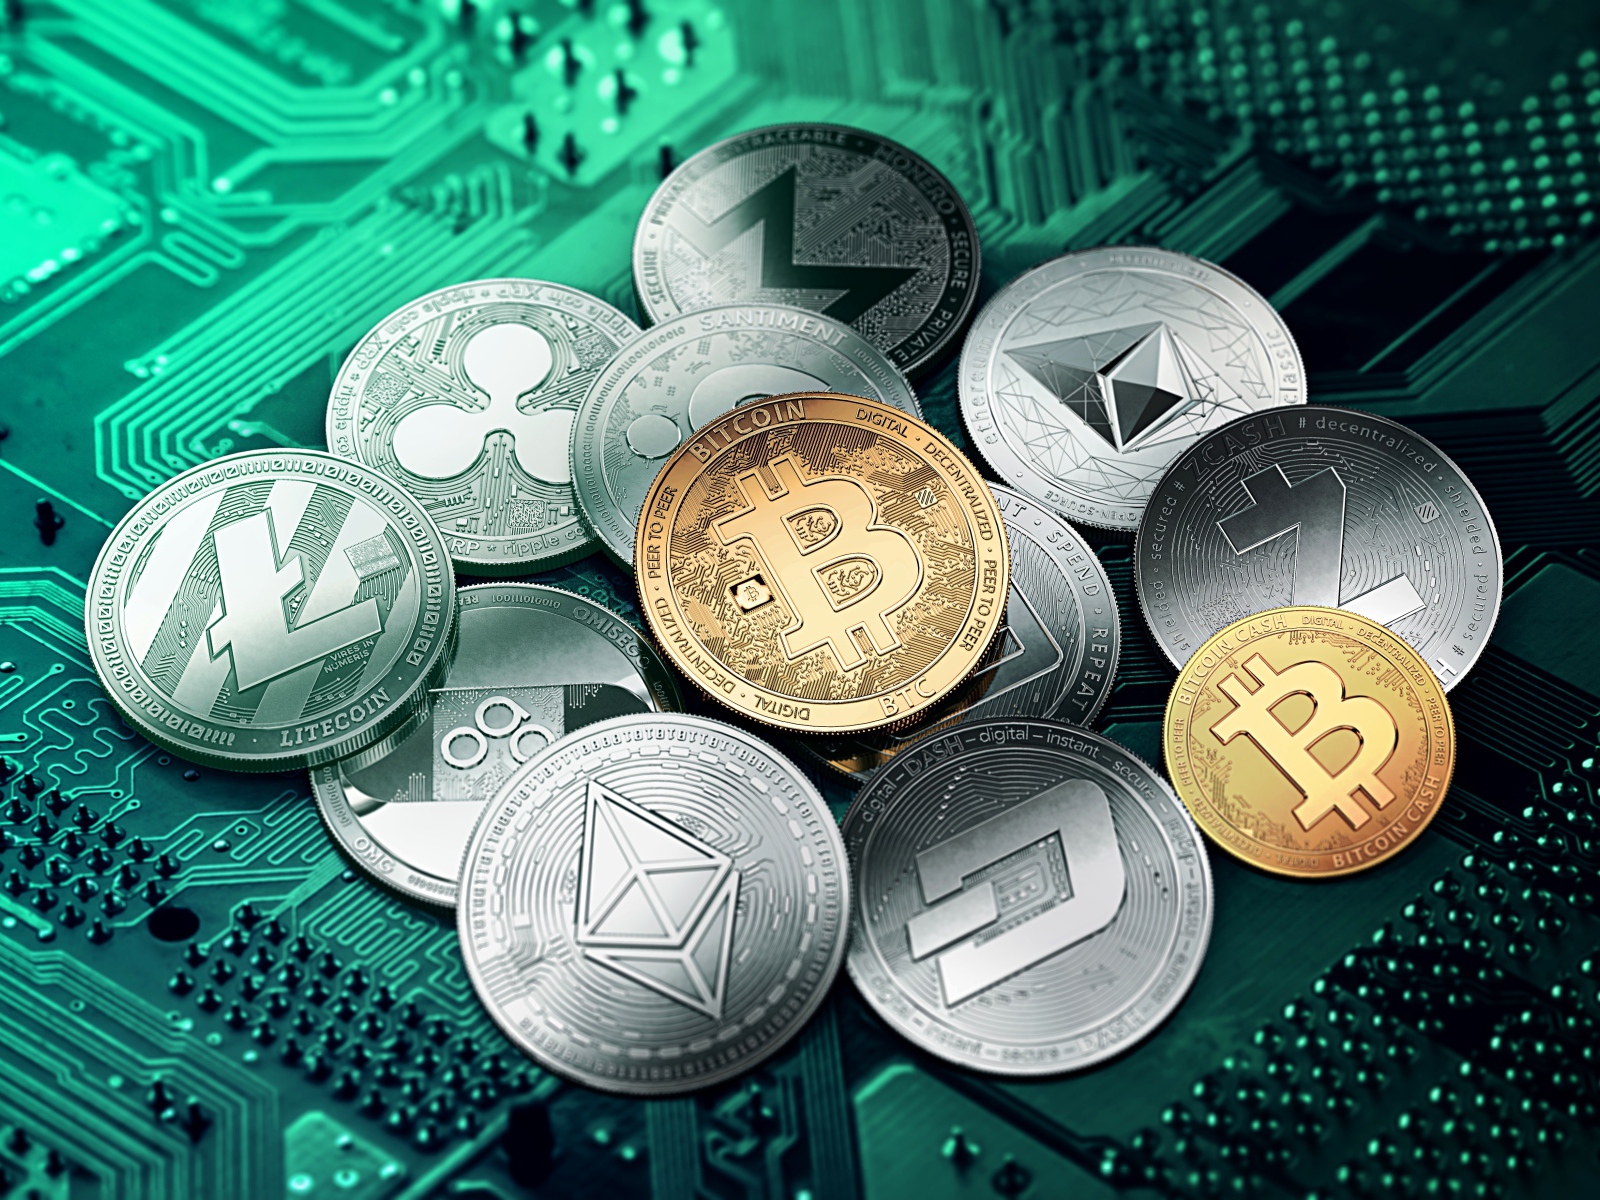 Cryptocurrency coins are on the computer board